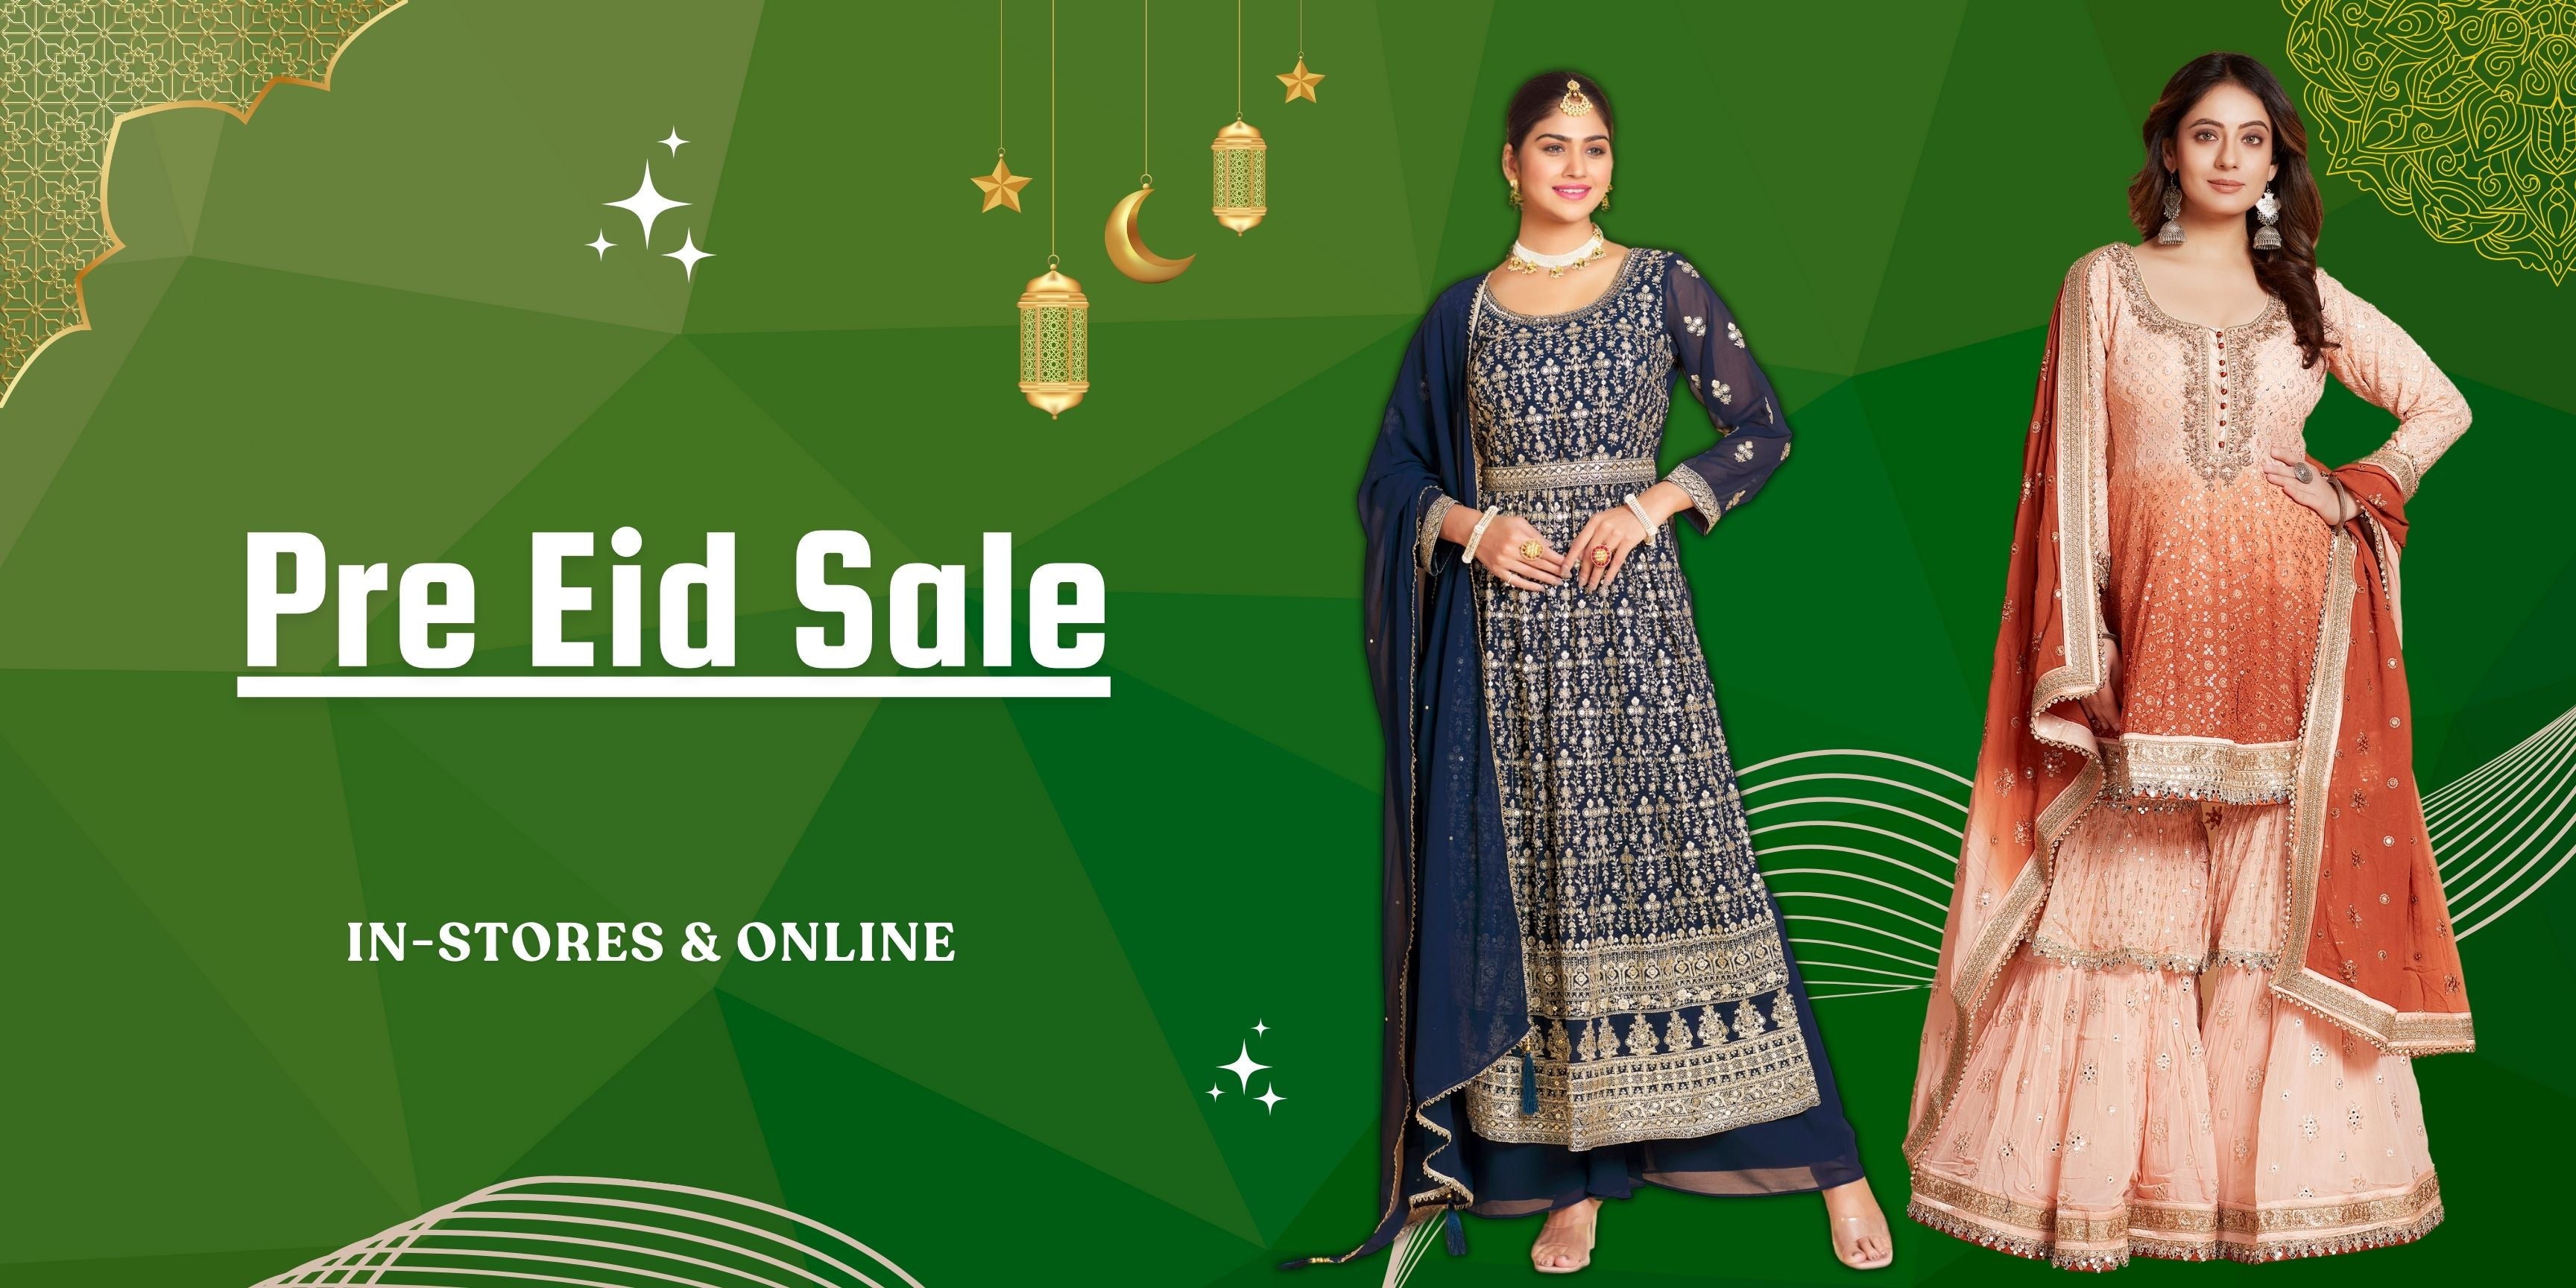 Roop Darshan  Online Shopping for the Latest Ethnic Clothes & Fashion